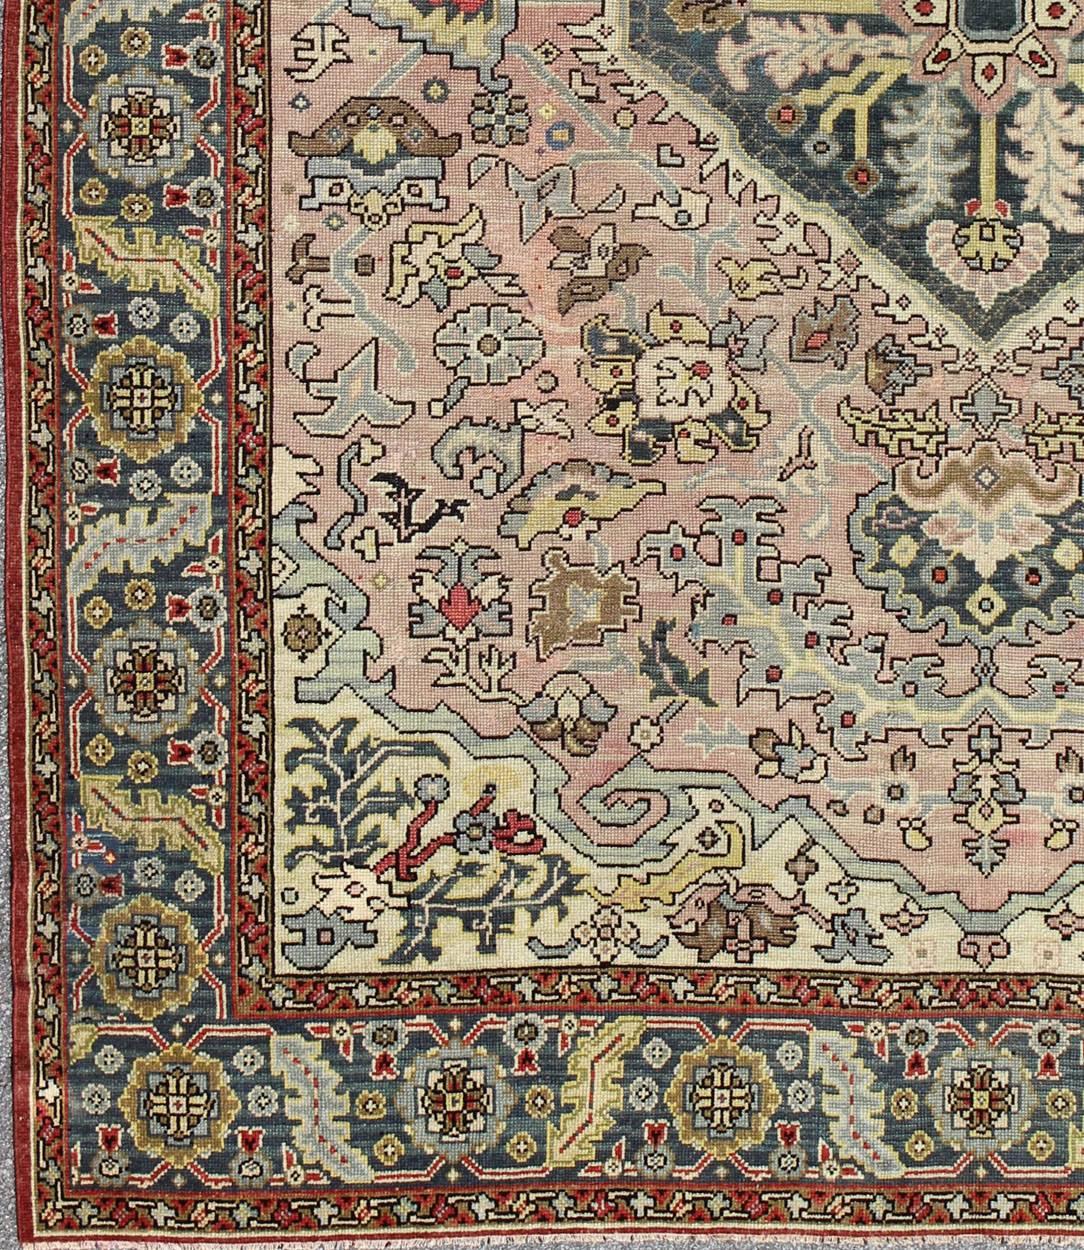 Hand Knotted Turkish Oushak Rug with Floral Design in Light Pink and Steel Blue. Hand Knotted Turkish Oushak Rug with Floral Design in Light Pink and Steel Blue. Keivan Woven Arts /  rug / TU-MTU-3612, mid-20th century Large vintage oushak.